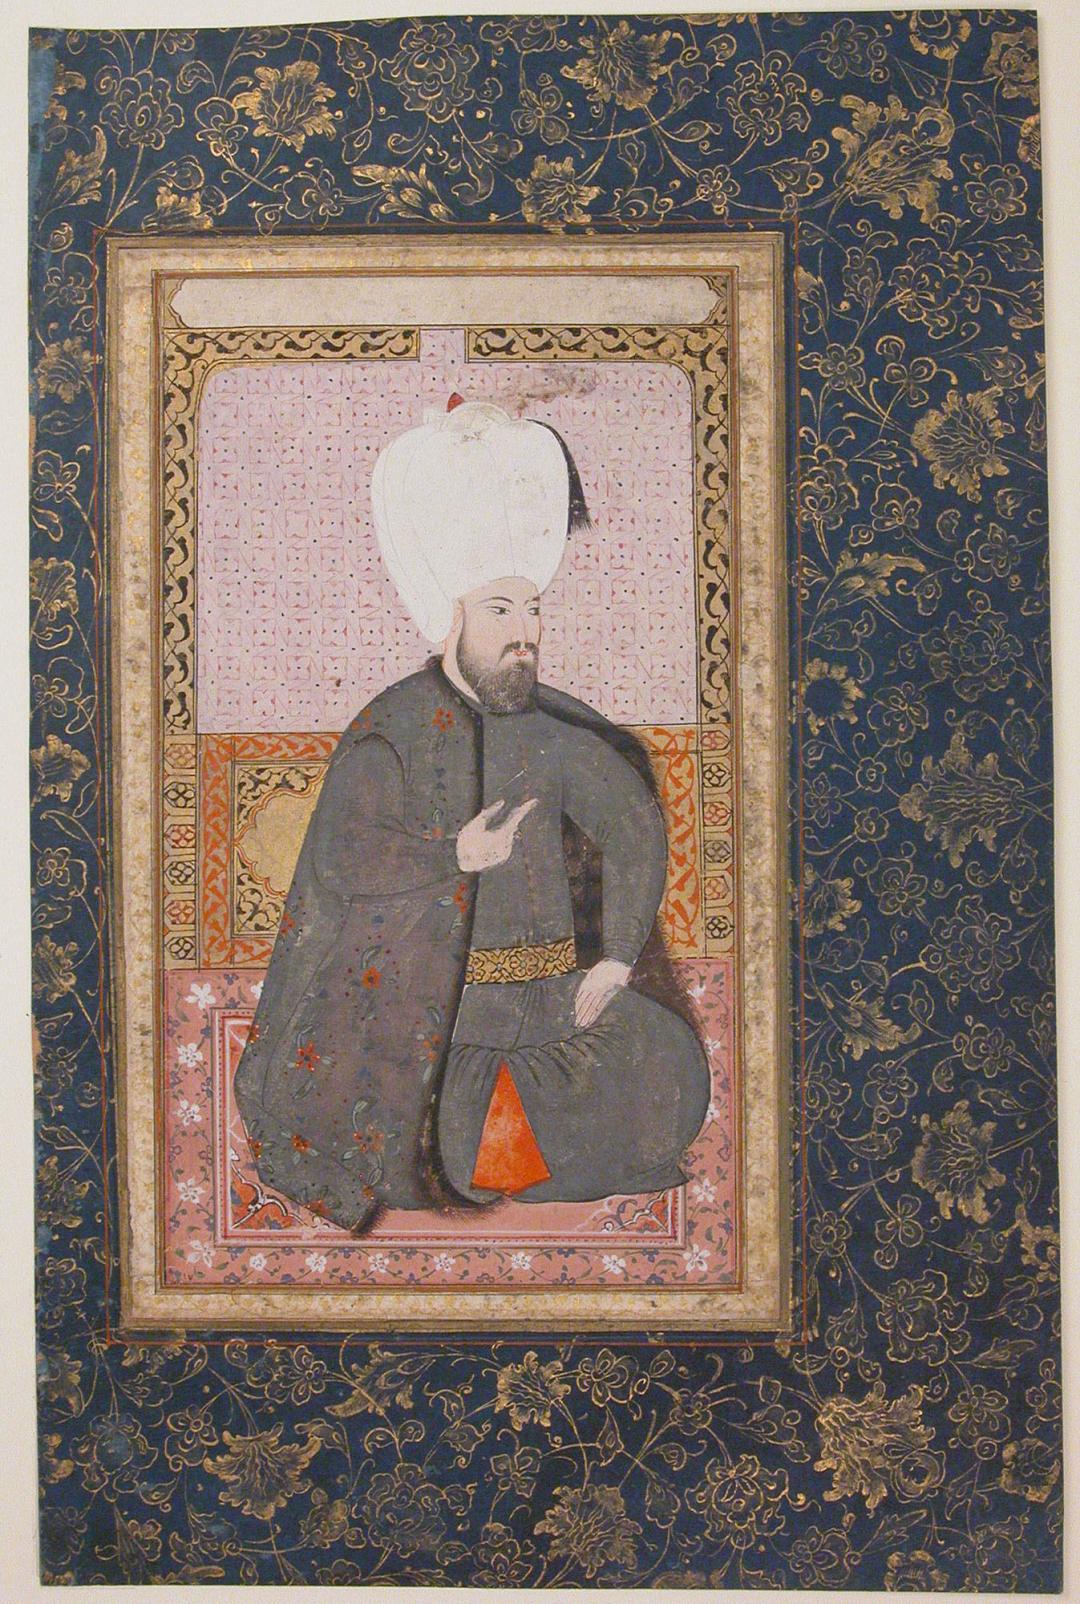 Portrait of Sultan Ahmed I, 1600